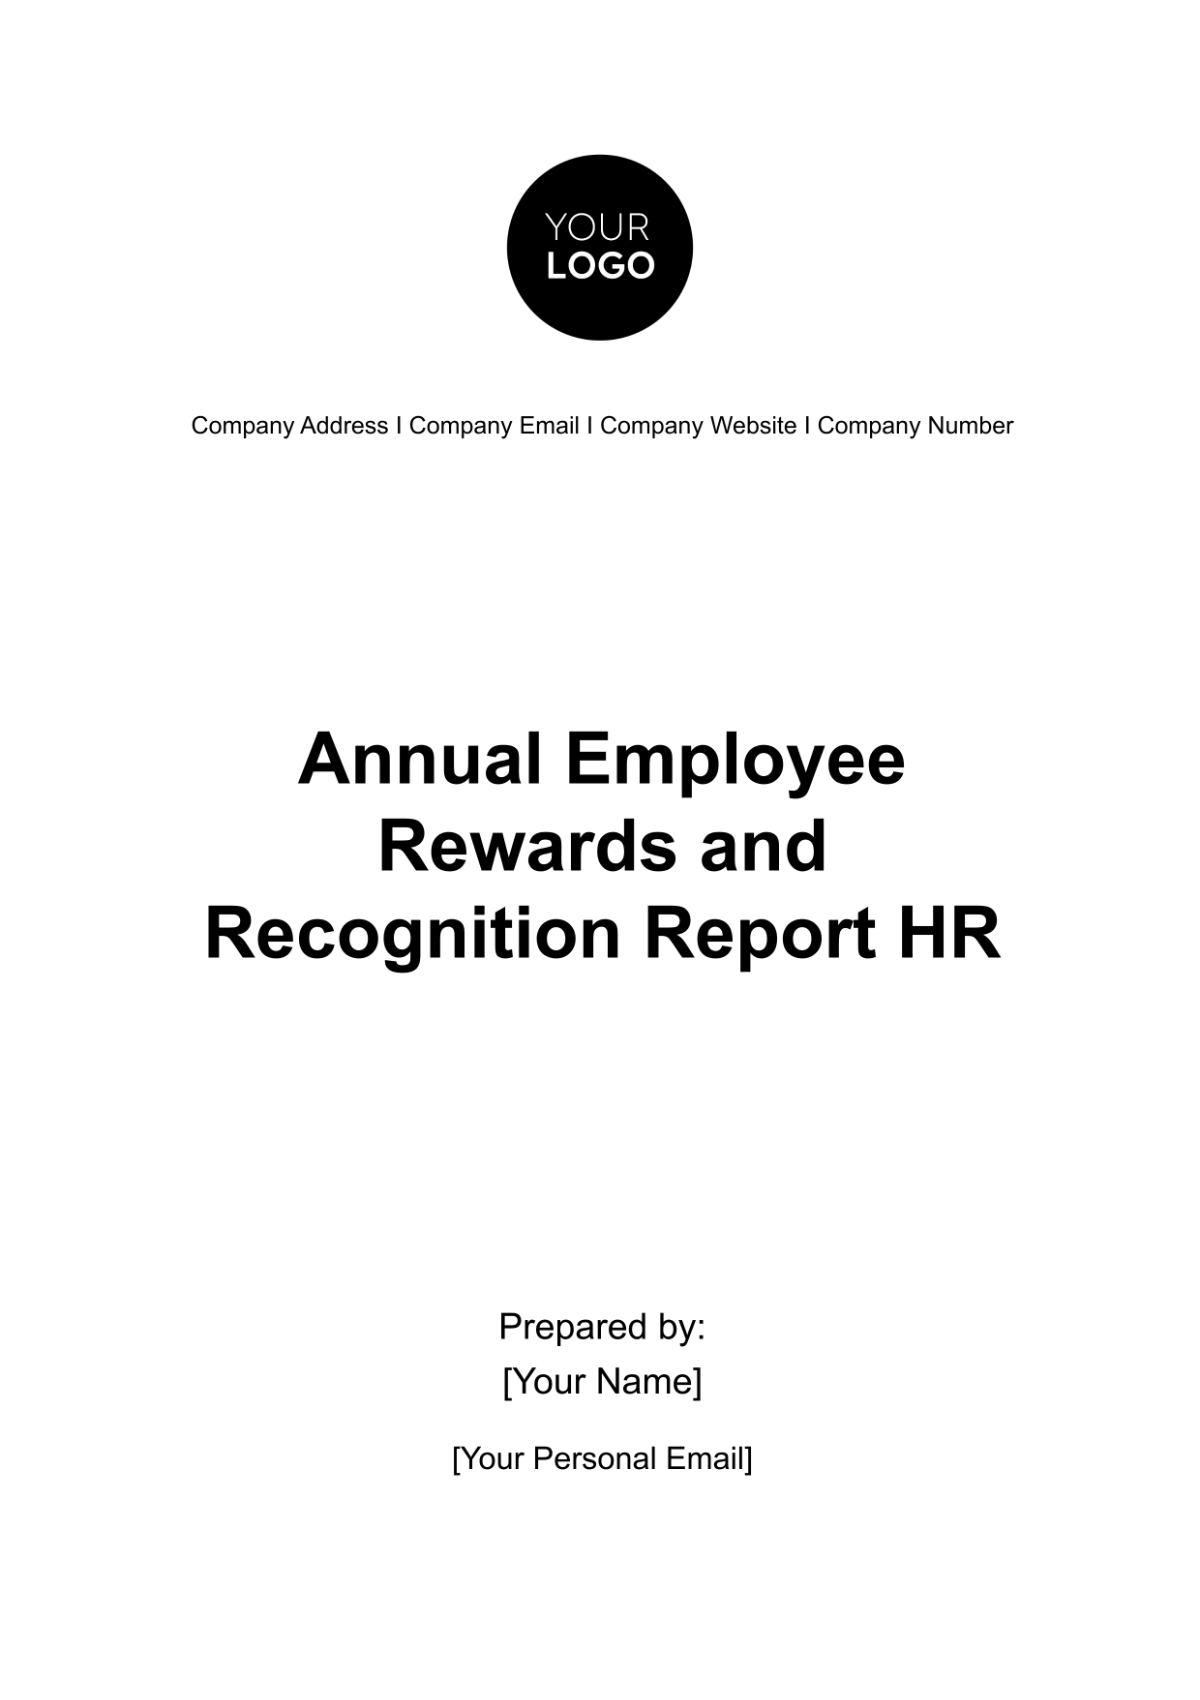 Free Annual Employee Rewards and Recognition Report HR Template